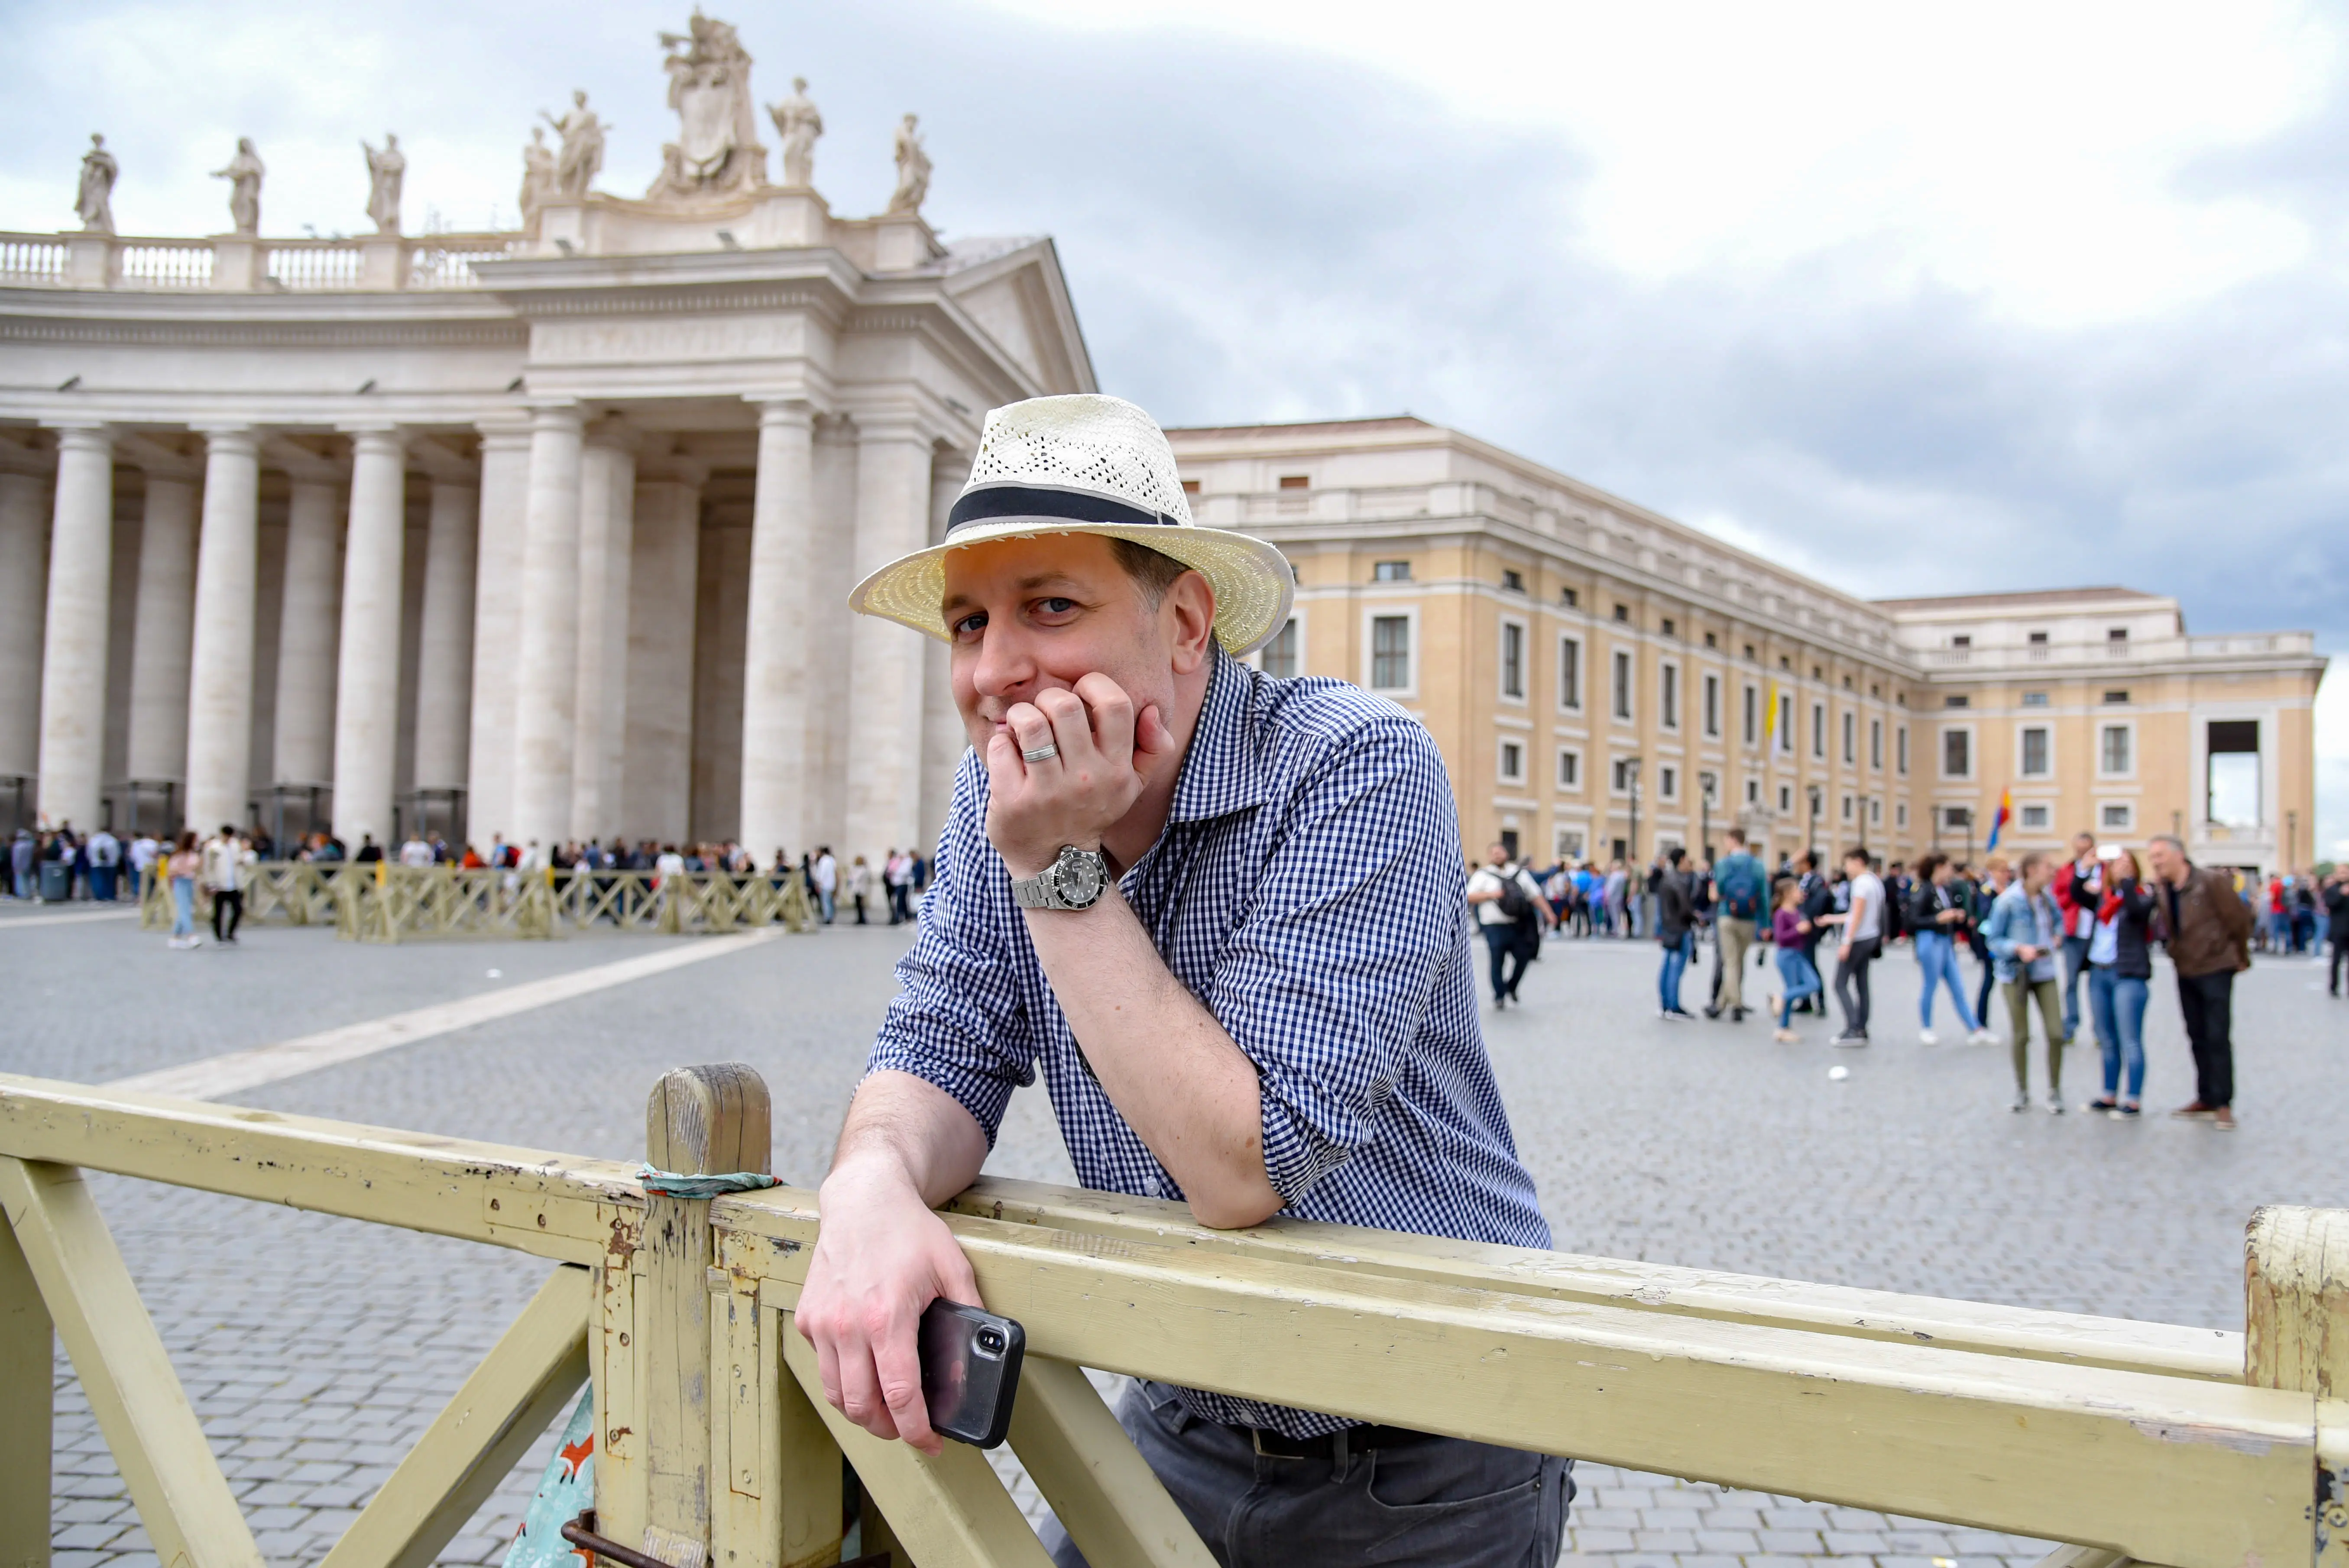 Steven Harms in St. Peter’s Square, Rome